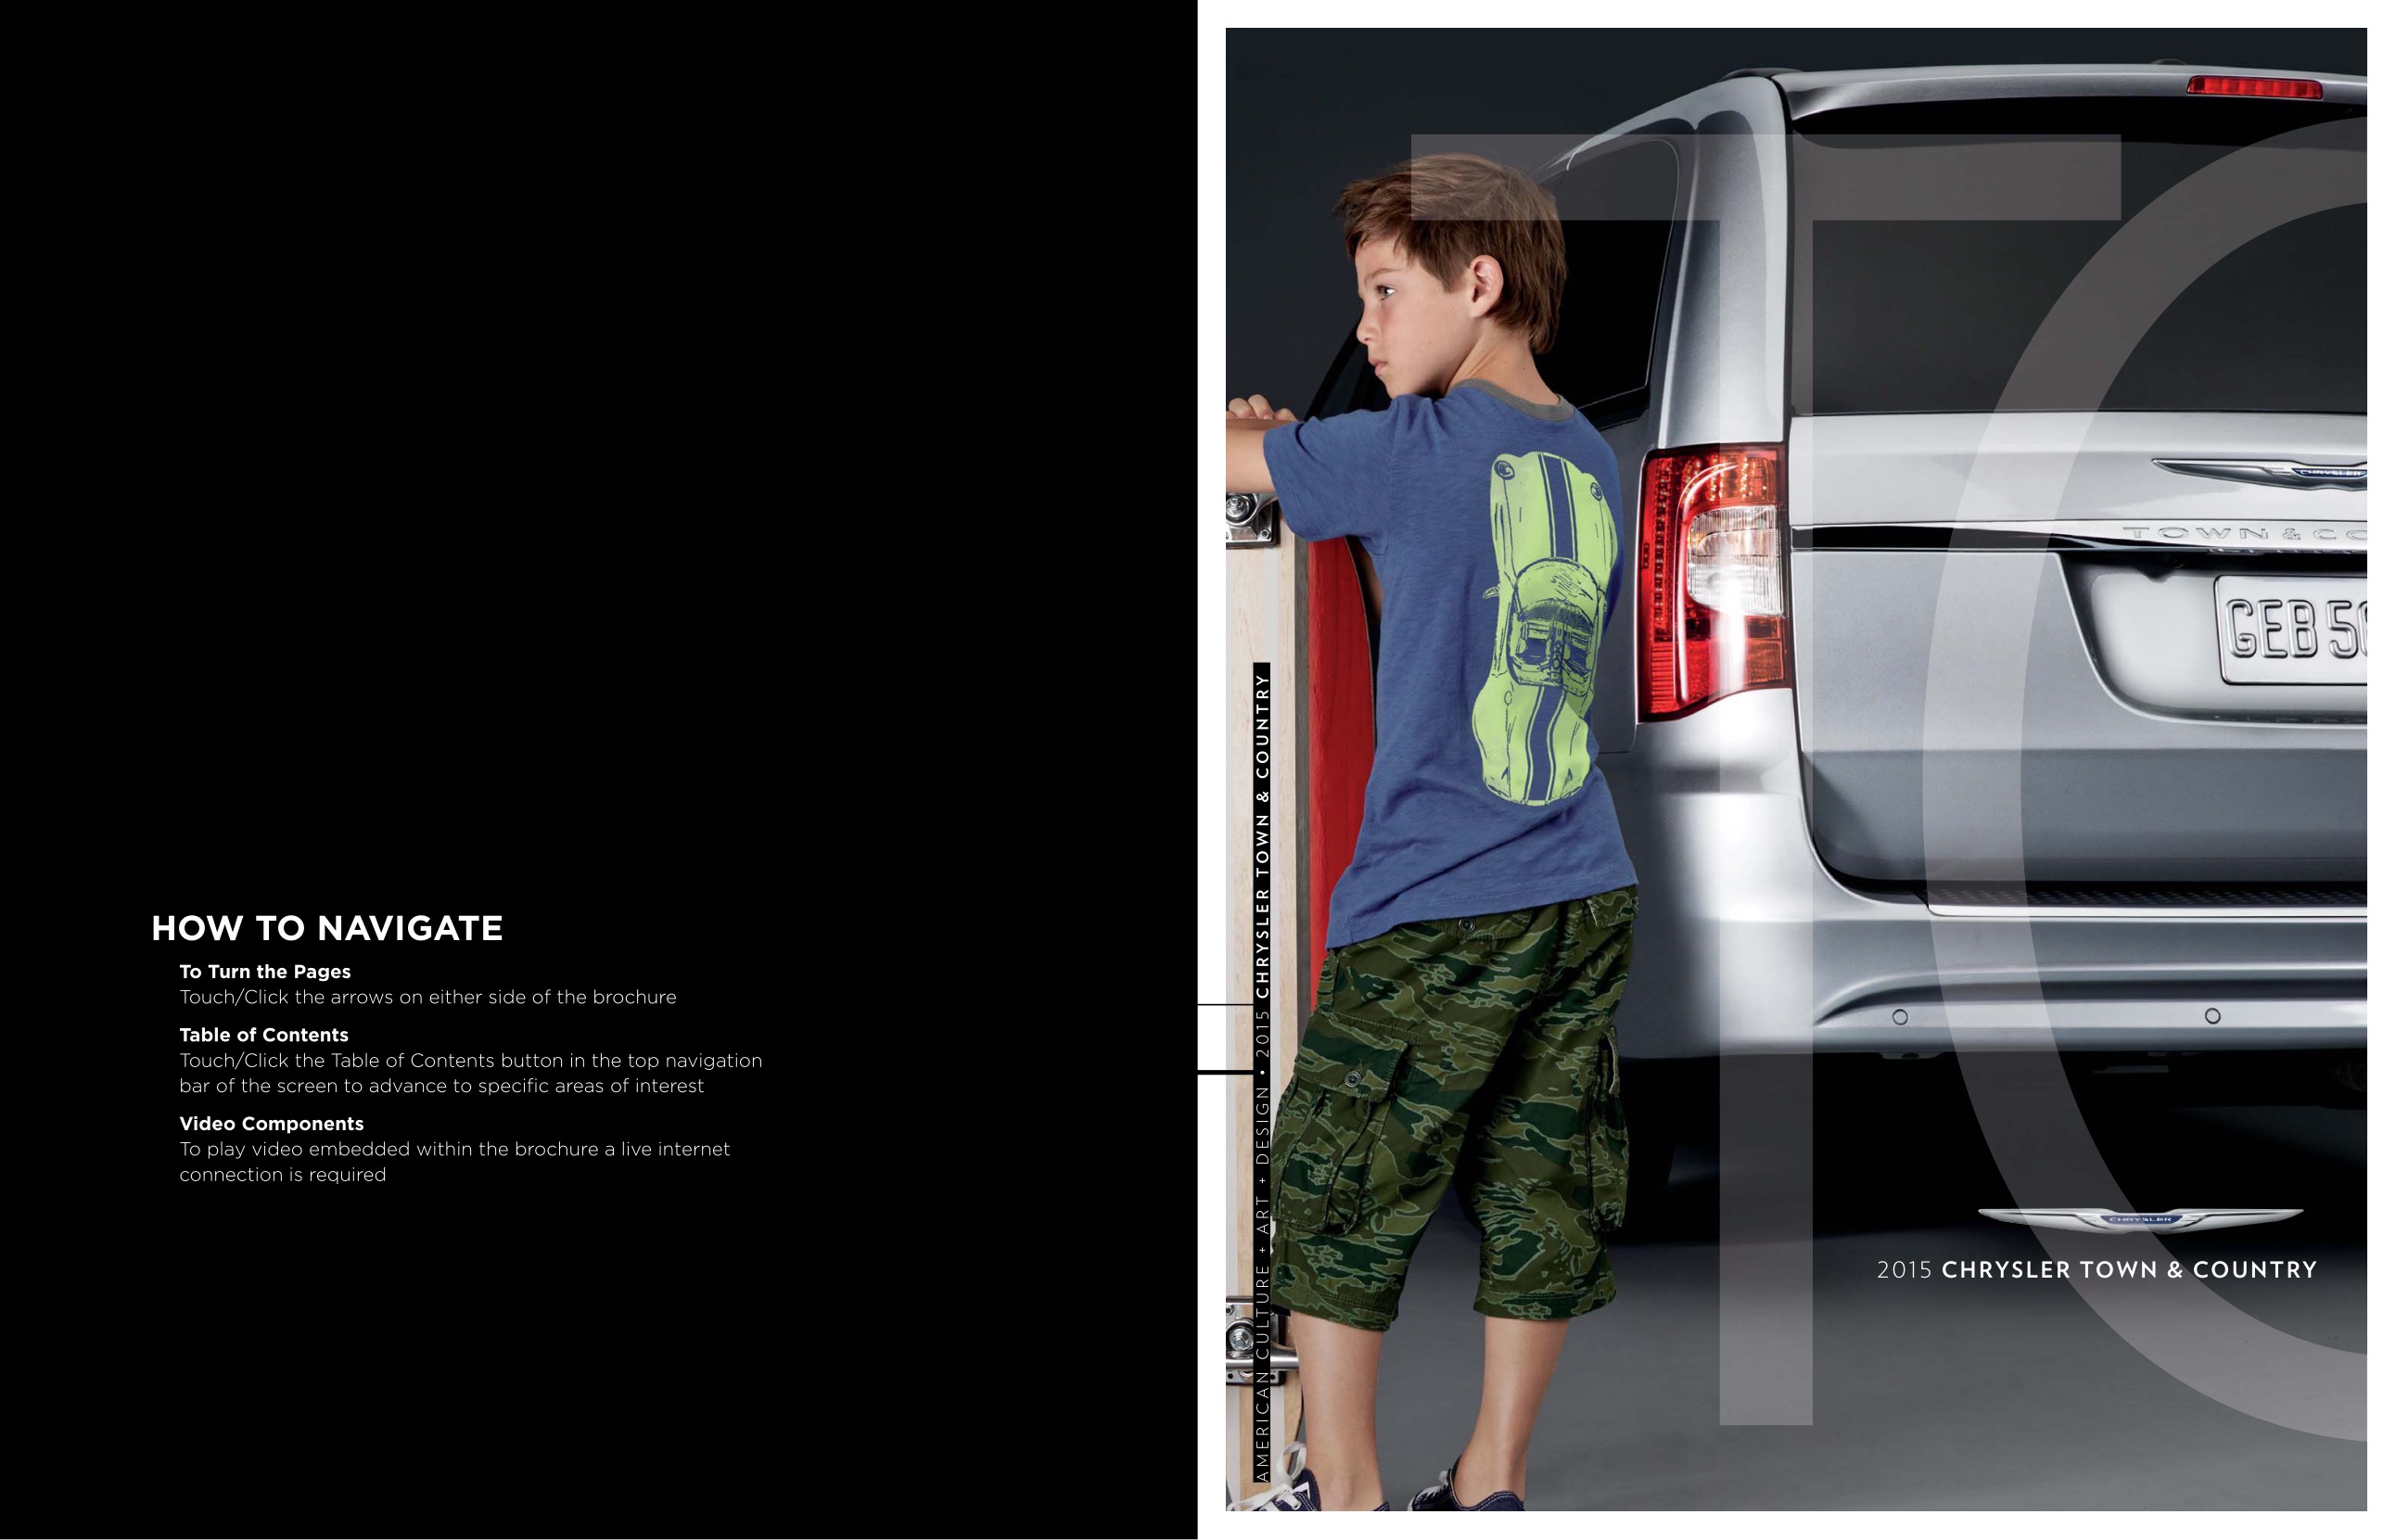 2015 Chrysler Town & Country Brochure